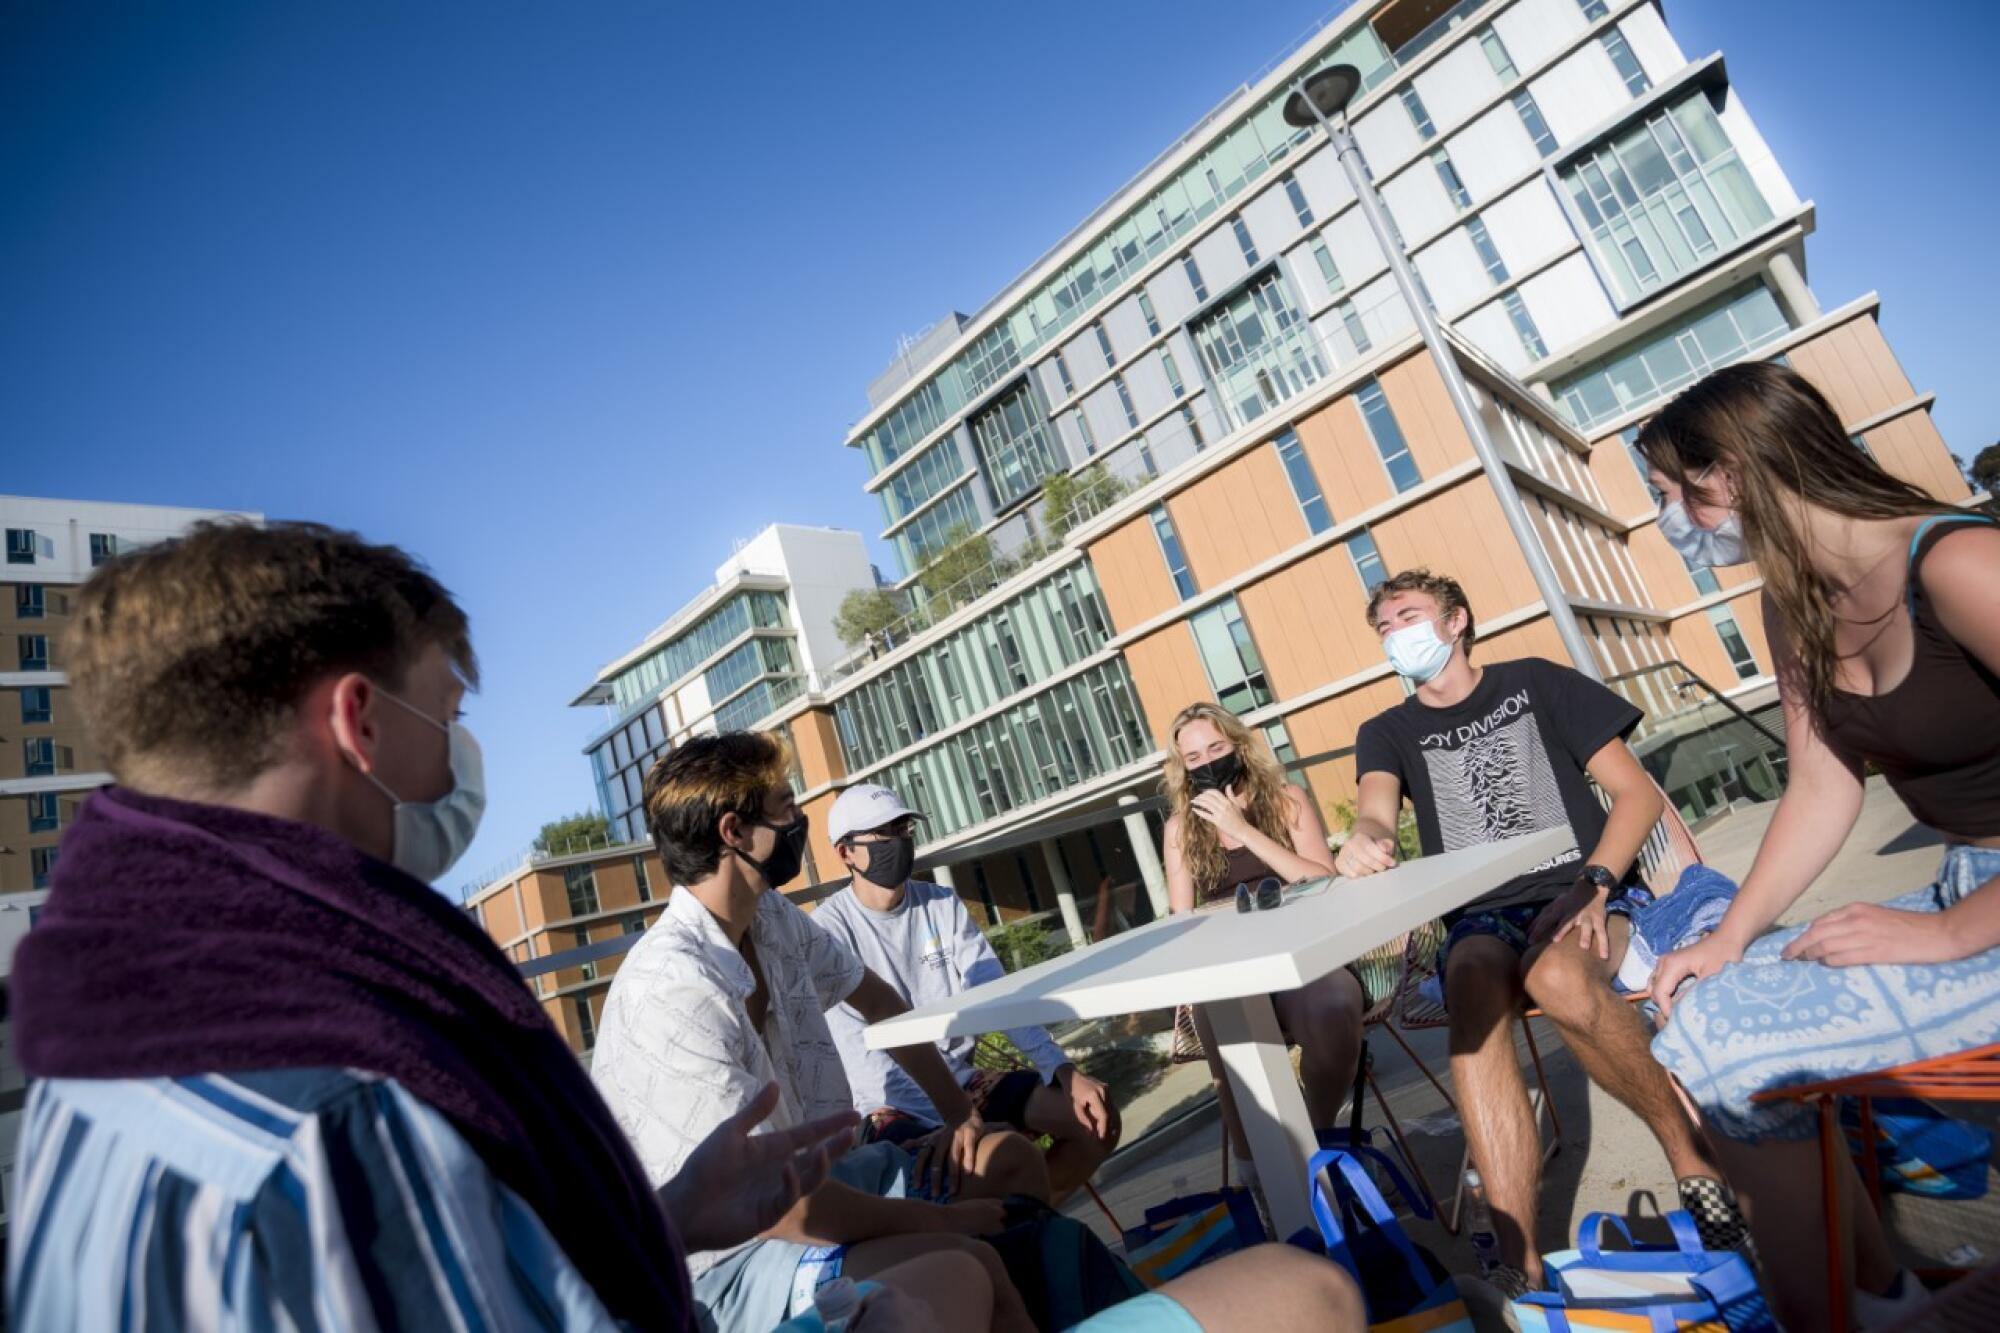 UCSD's new North Torrey Pines Living and Learning Neighborhood has become a campus hot spot.